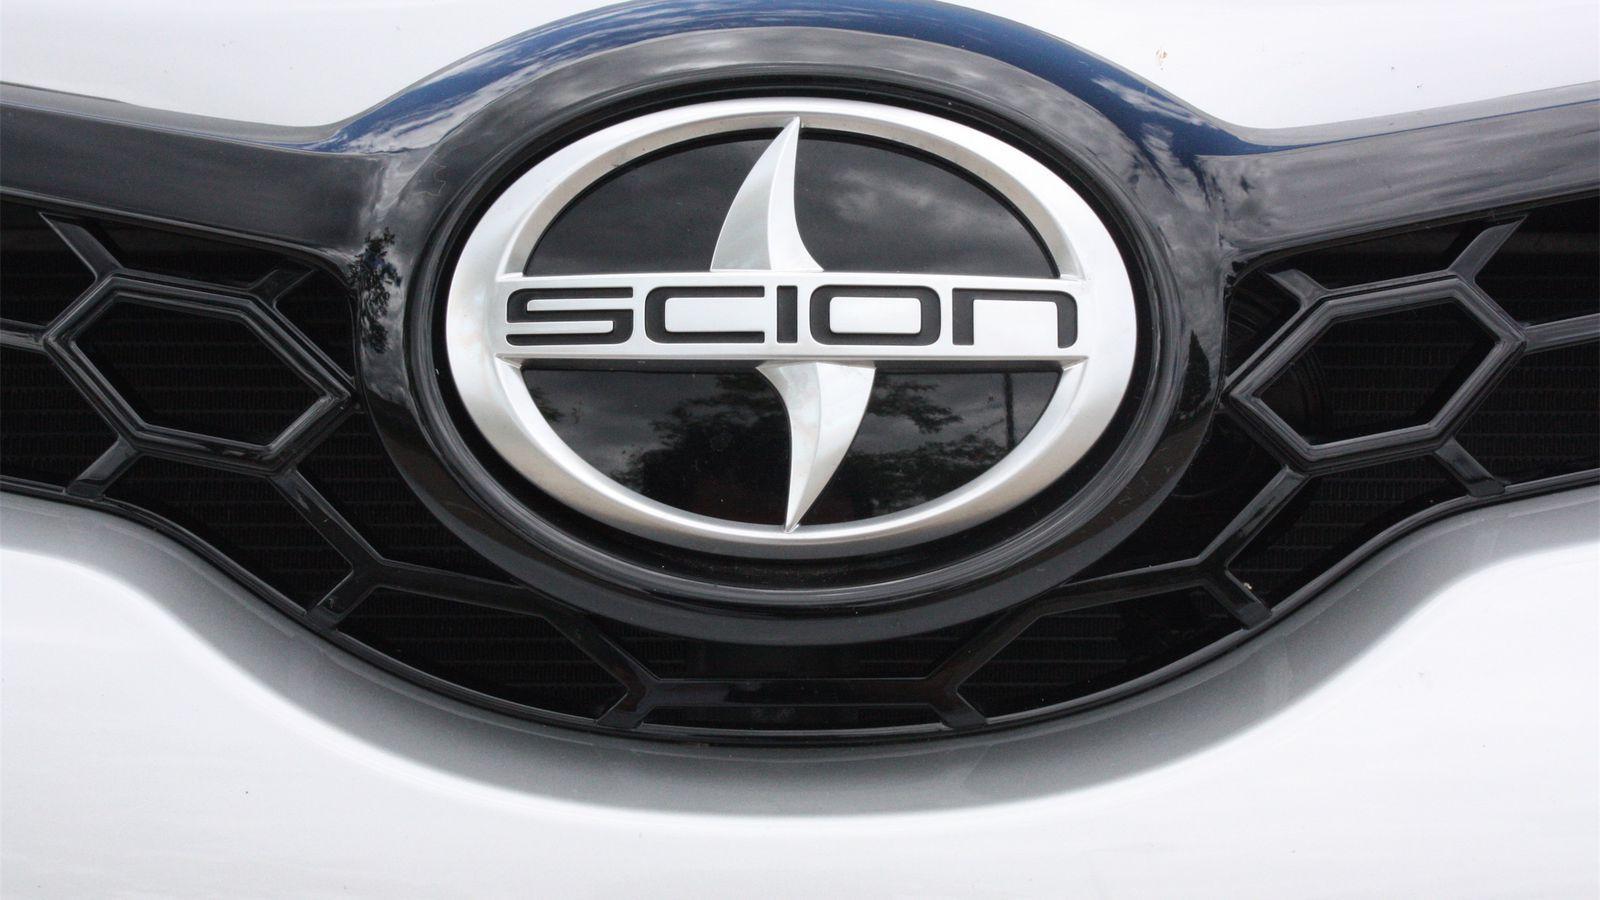 Scion Car Logo - Why Toyota's Scion brand may sell more cars after it's dead